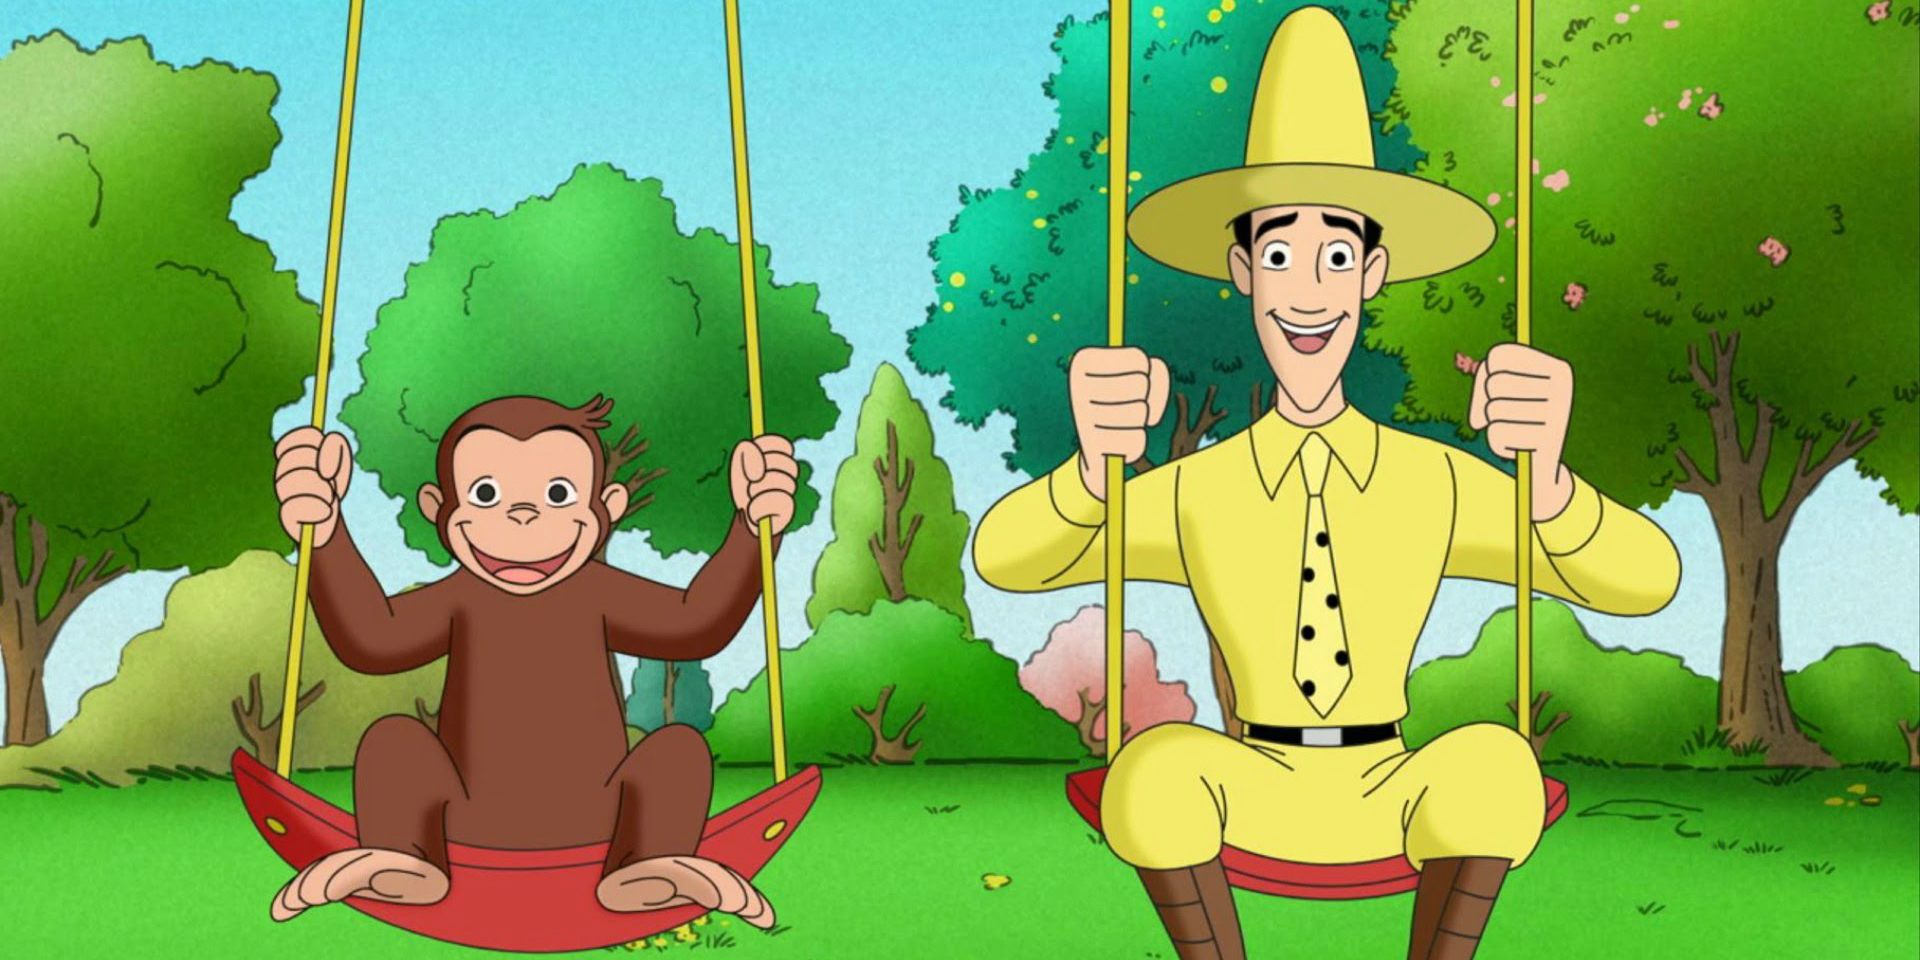 George and the man in the yellow hat on swings in Curious George